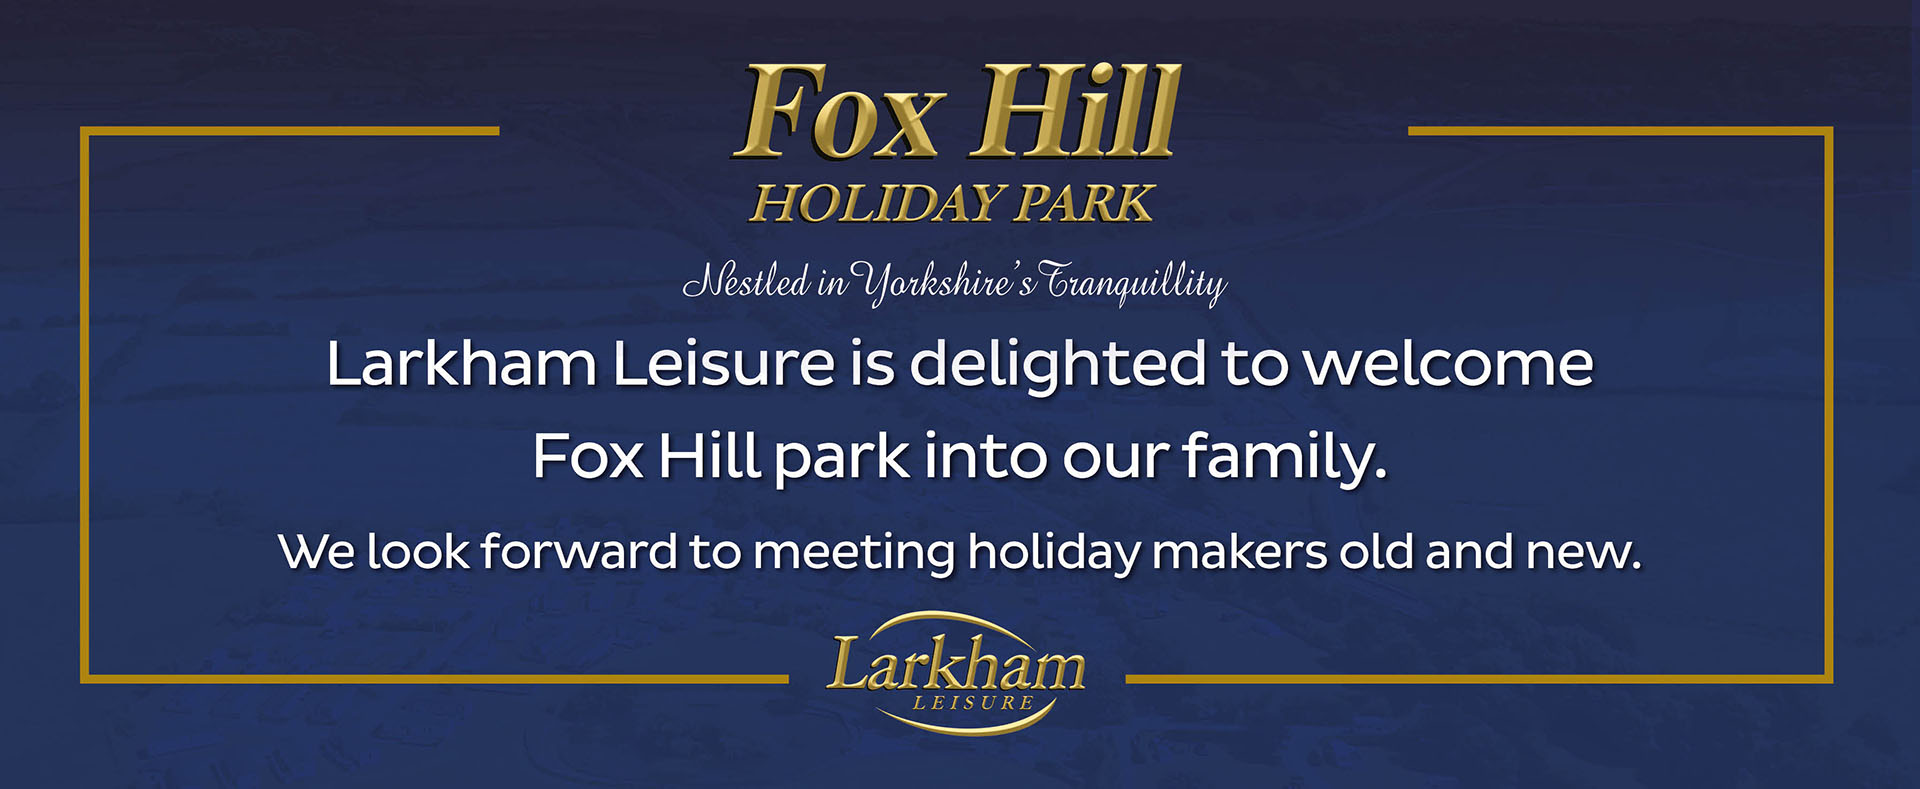 Larkham Leisure is delighted to welcome Fox Hill Park into our family. We look forward to meeting holiday makers old and new.